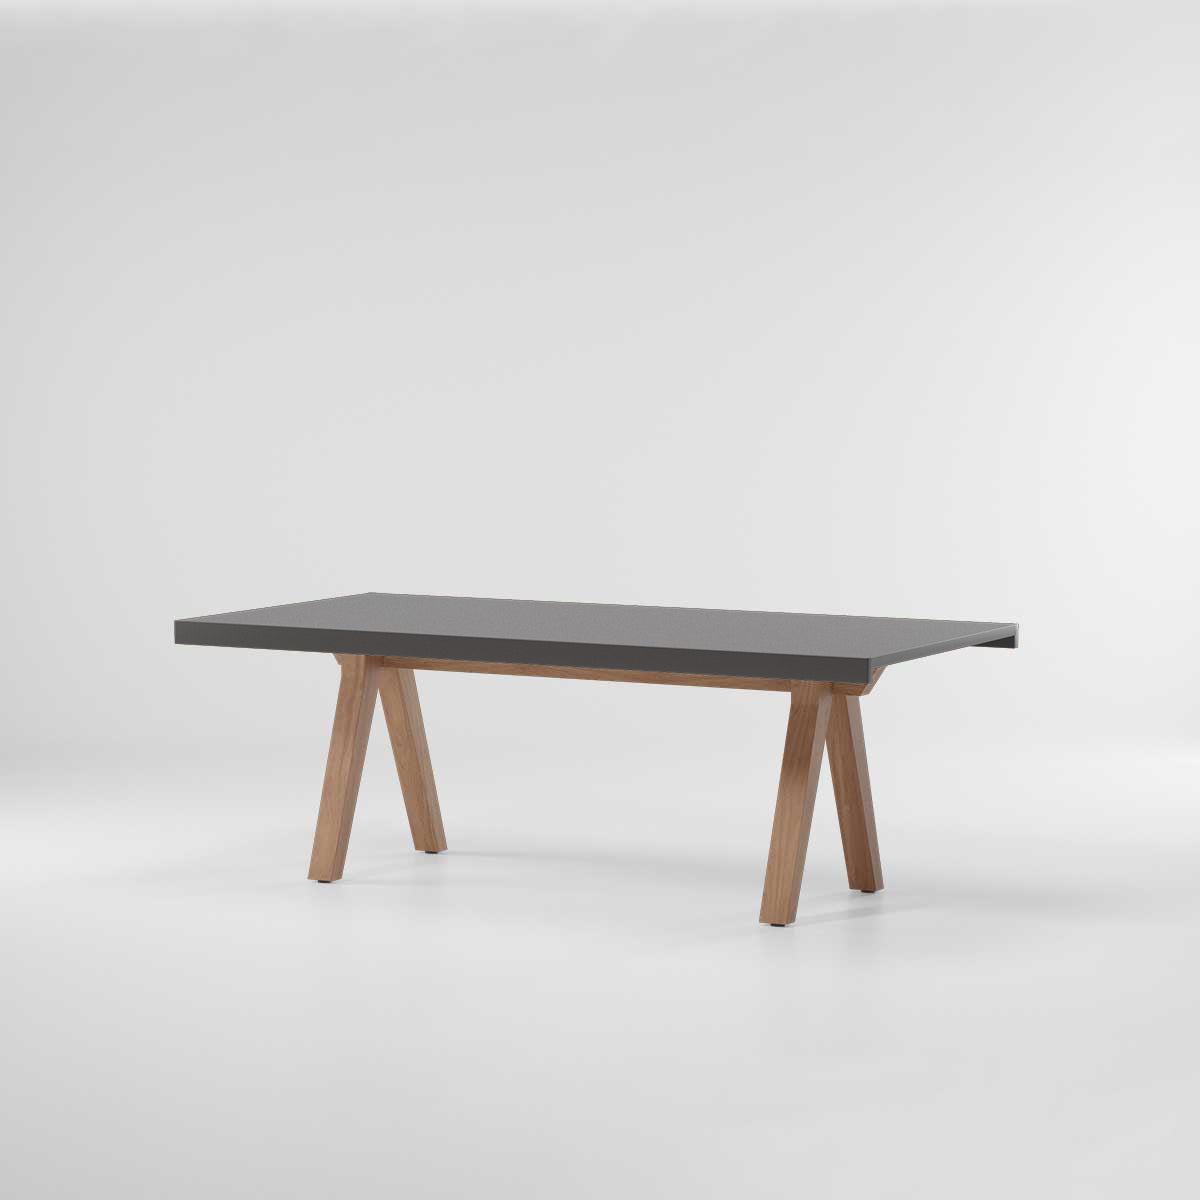 Kettal Vieques Dining Table / 8 Guests Teak Legs